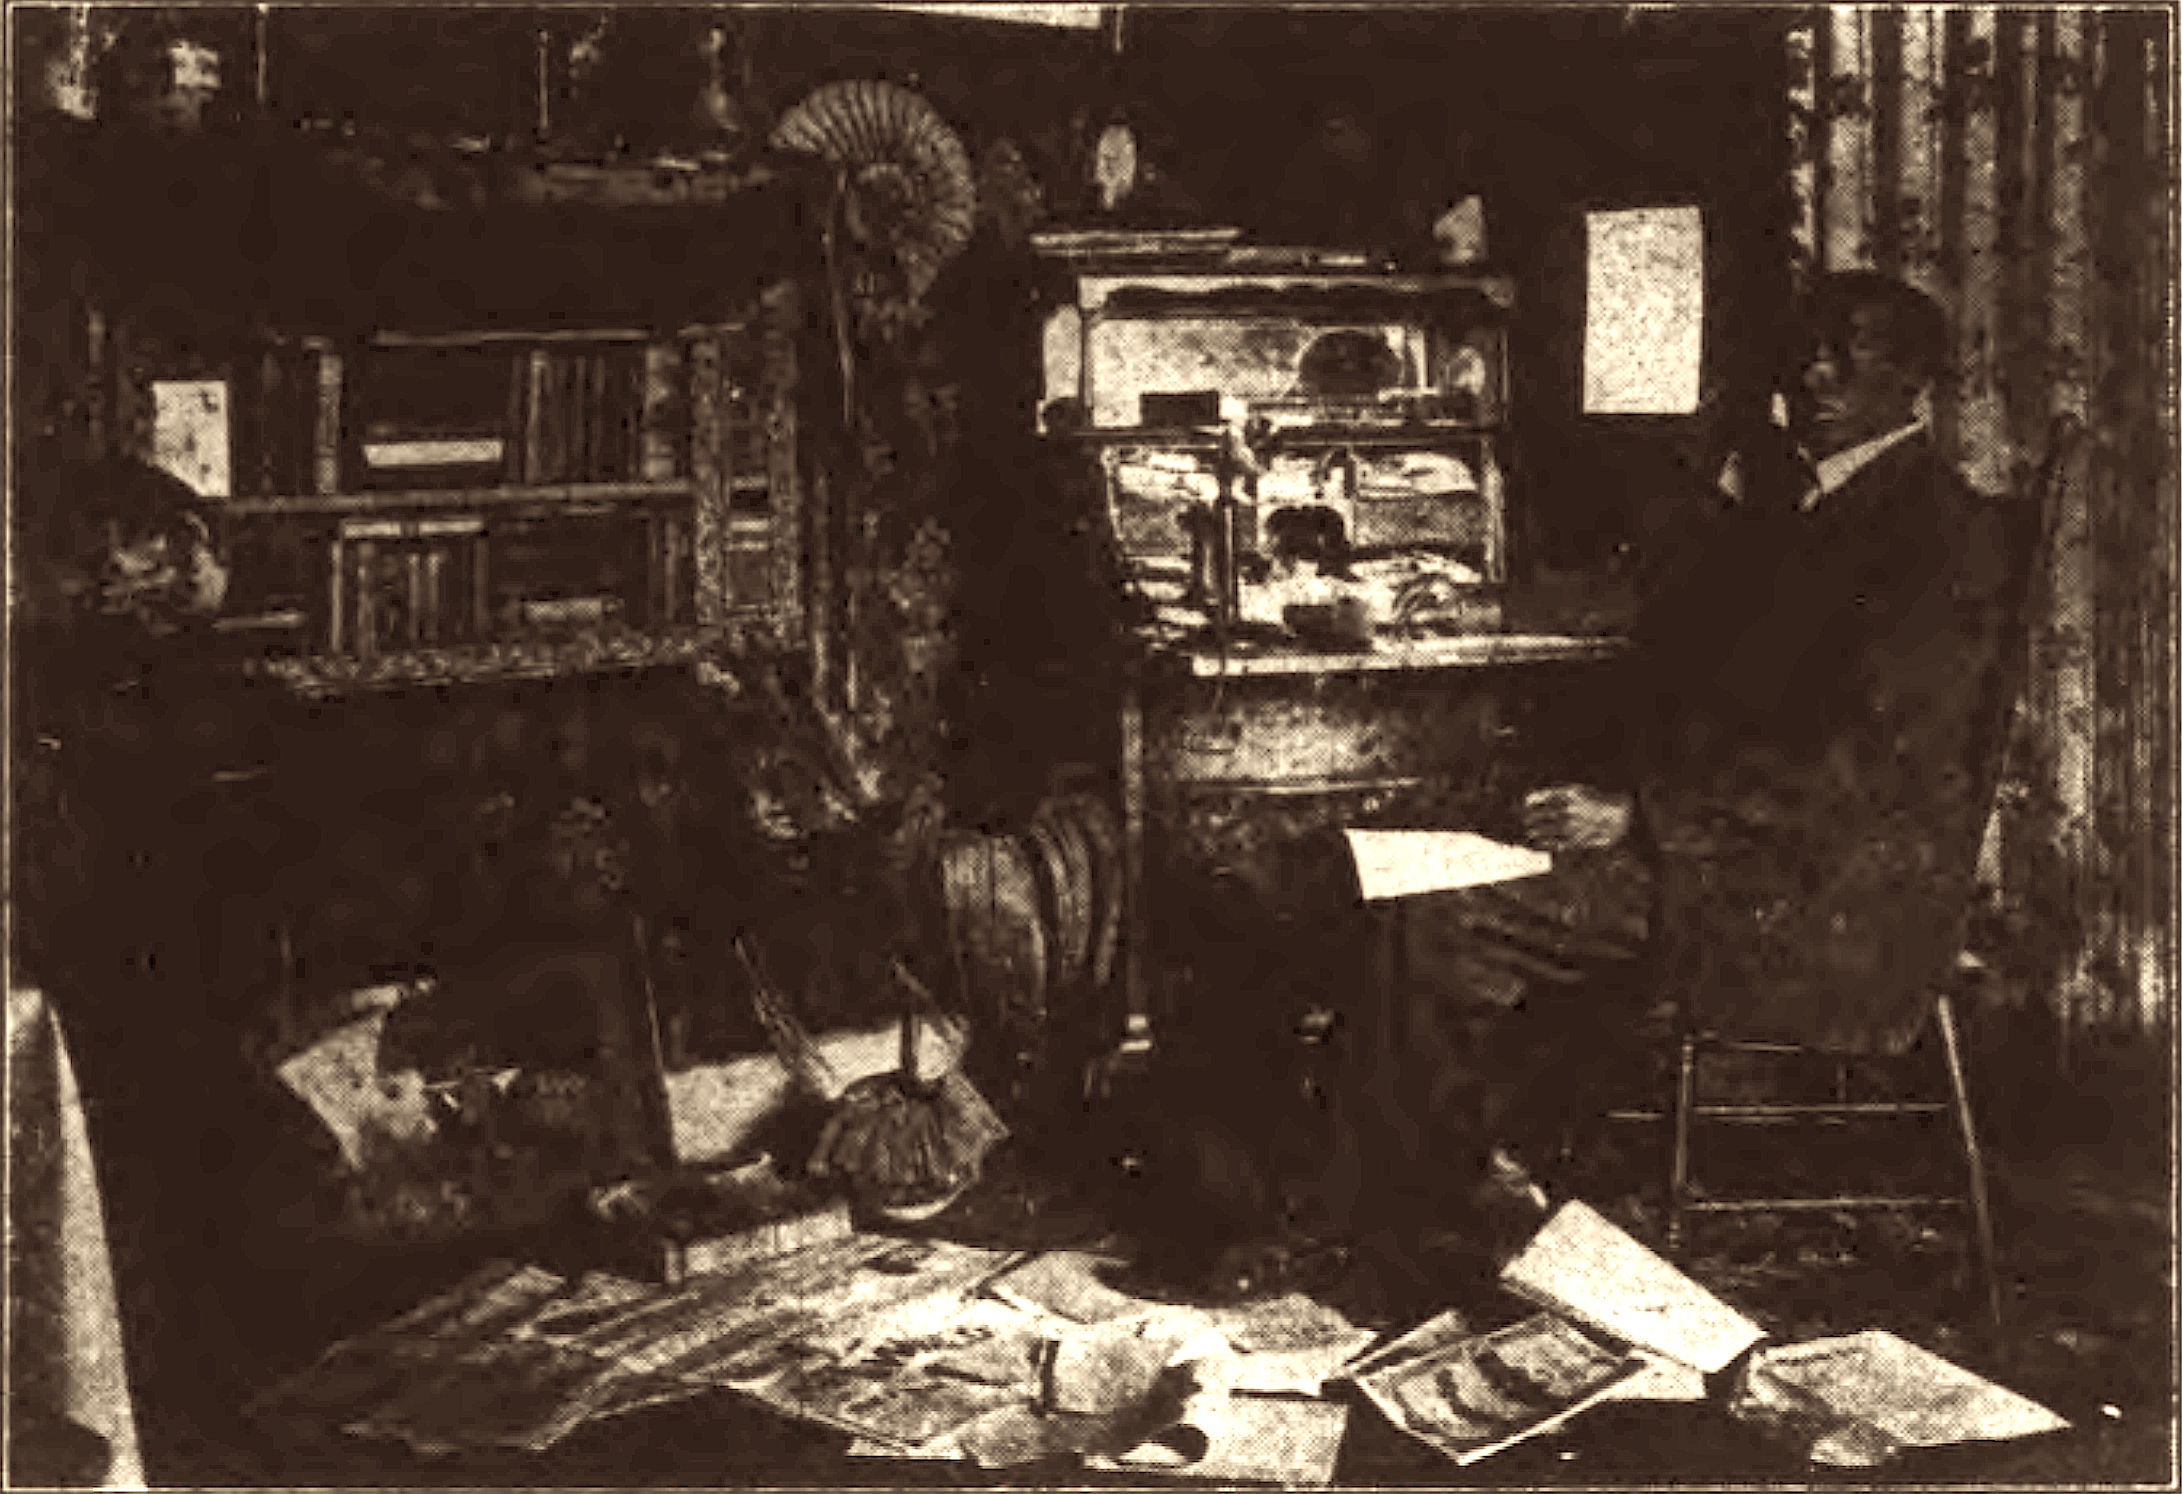 A man sits in a chair at a desk. Papers are strewn about the floor.